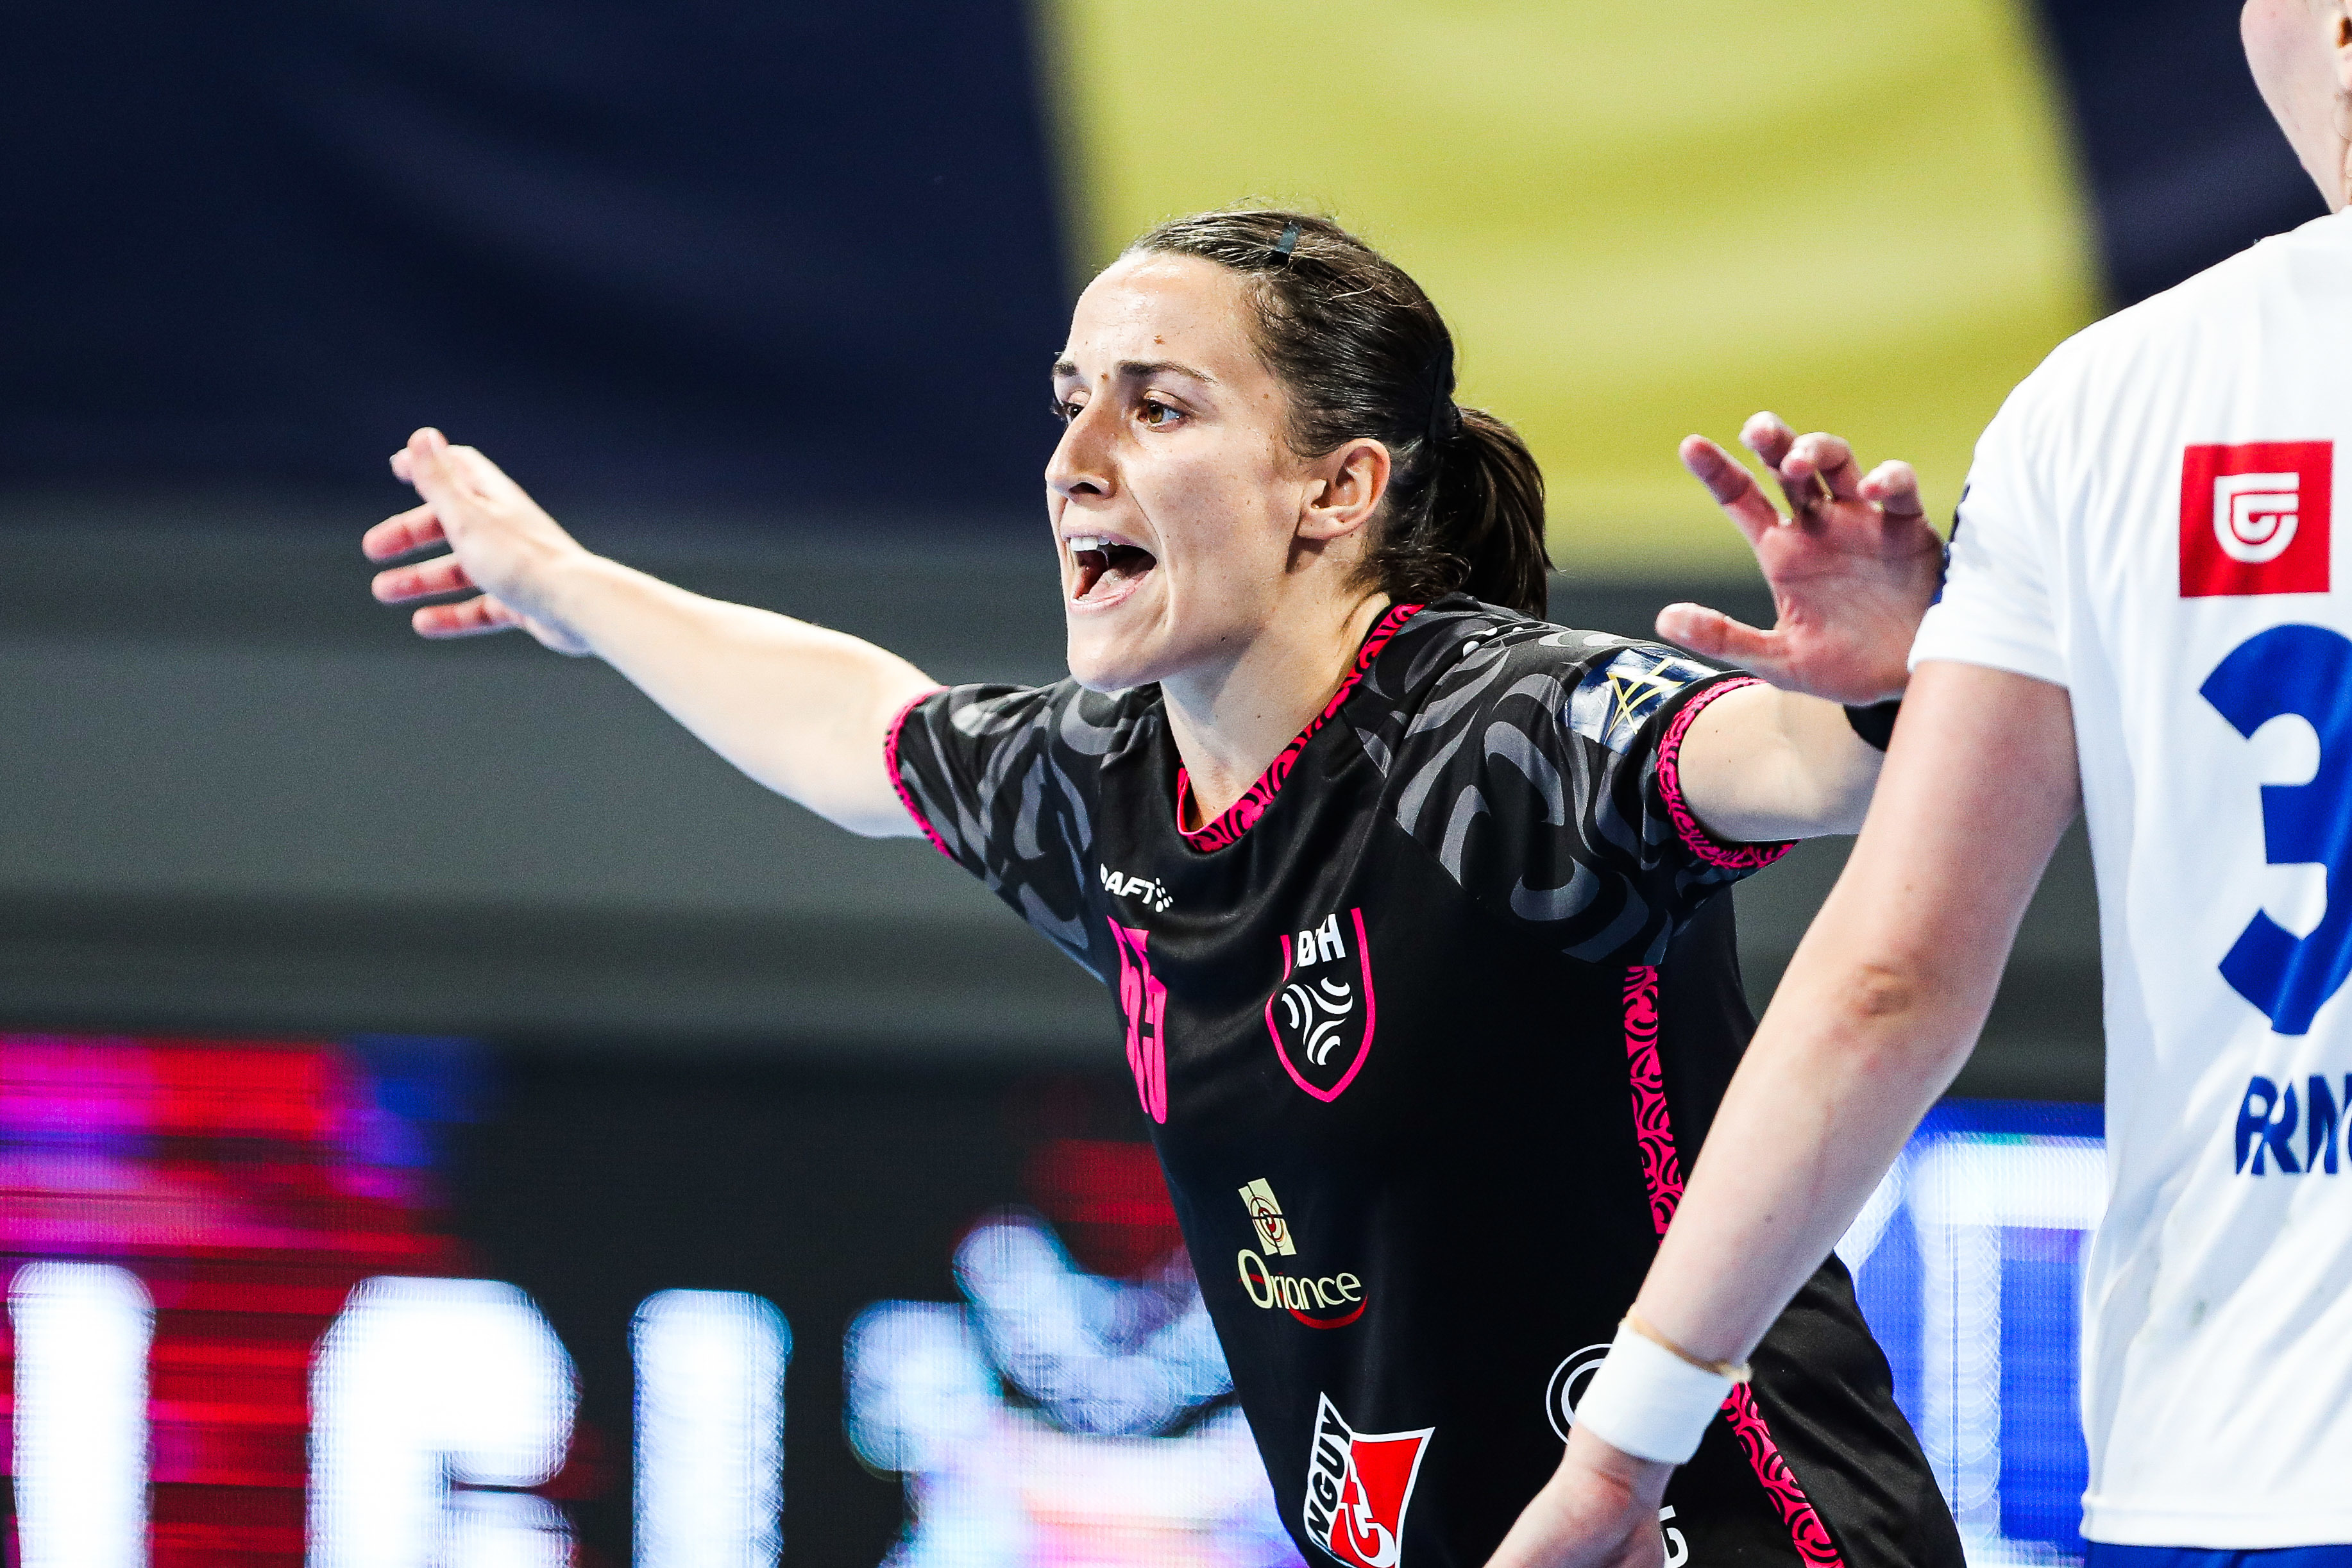 Pauline COATANEA of Brest during the EHF Women's Champions League match between Brest and Podgorica on November 13, 2021 in Brest, France. (Photo by Maxime Le Pihif/Icon Sport) - Pauline COATANEA - Brest (France)